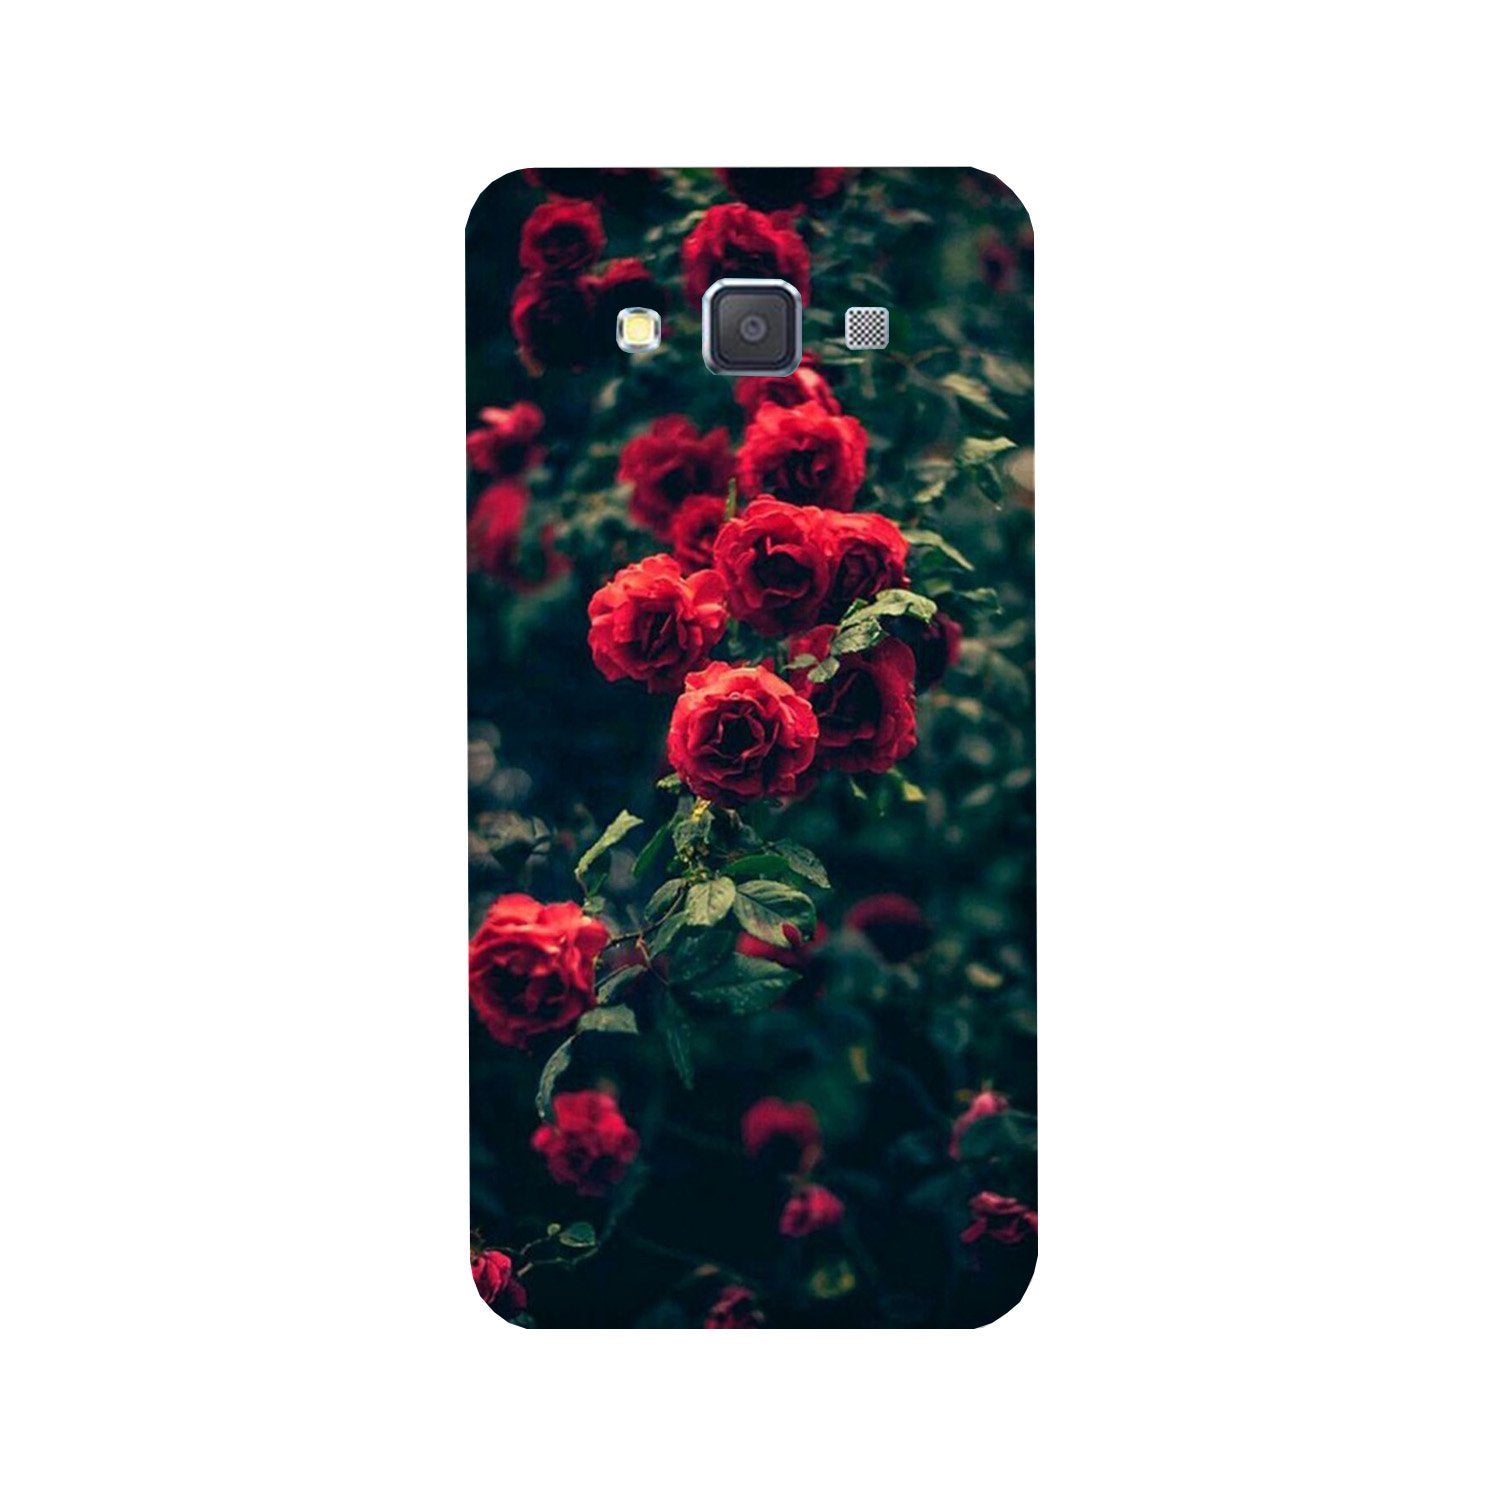 Red Rose Case for Galaxy J5 (2016)